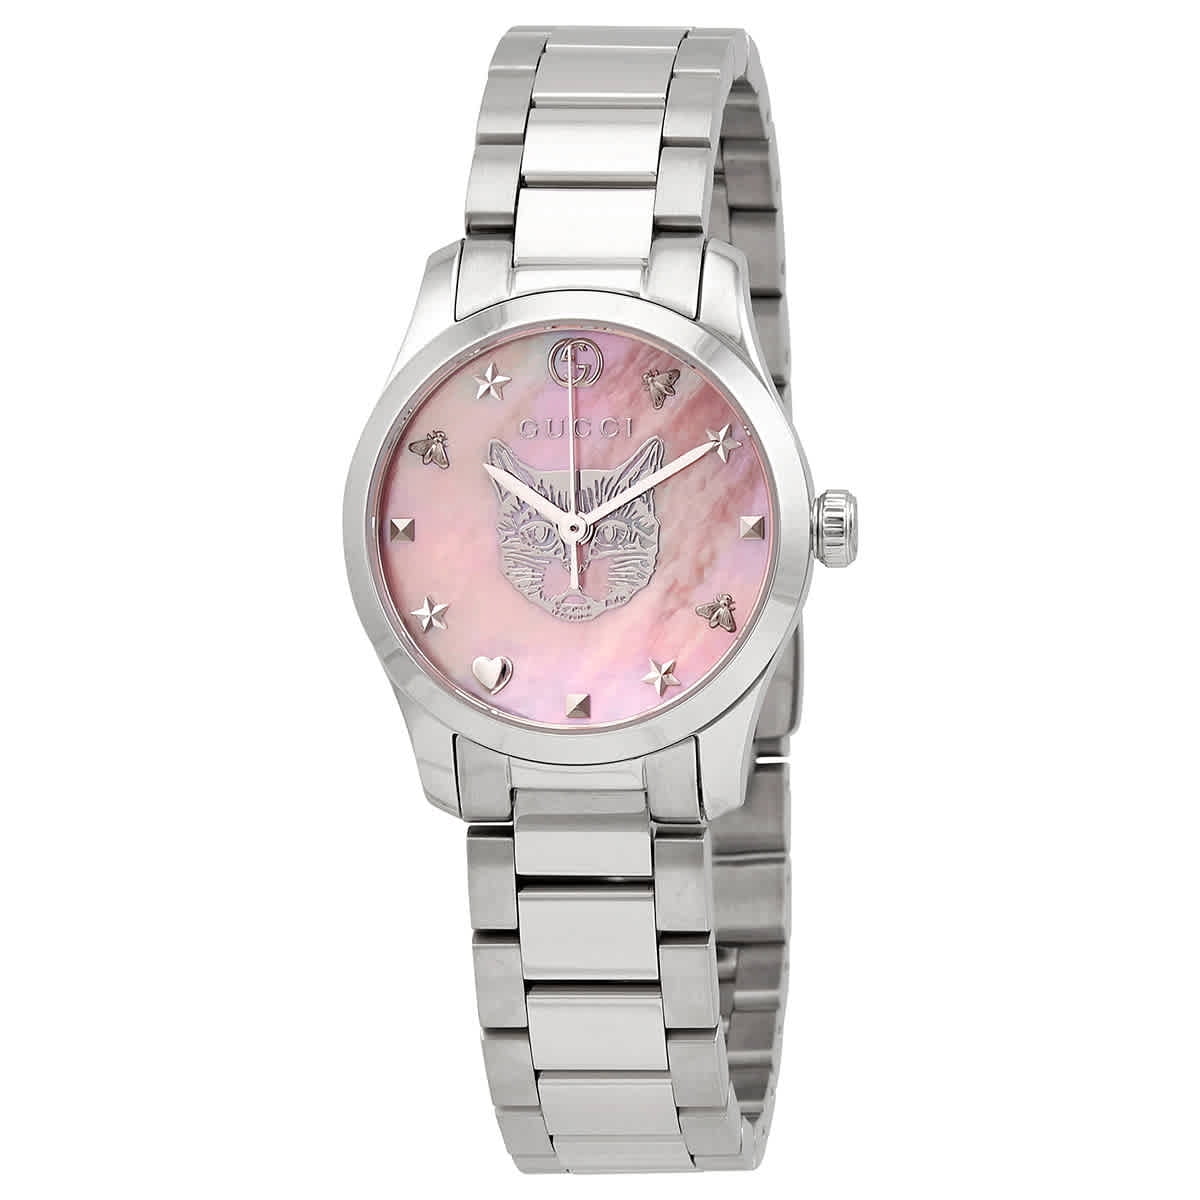 Gucci G-Timeless Quartz Pink Mother of Pearl Dial Ladies Watch YA1265013 -  